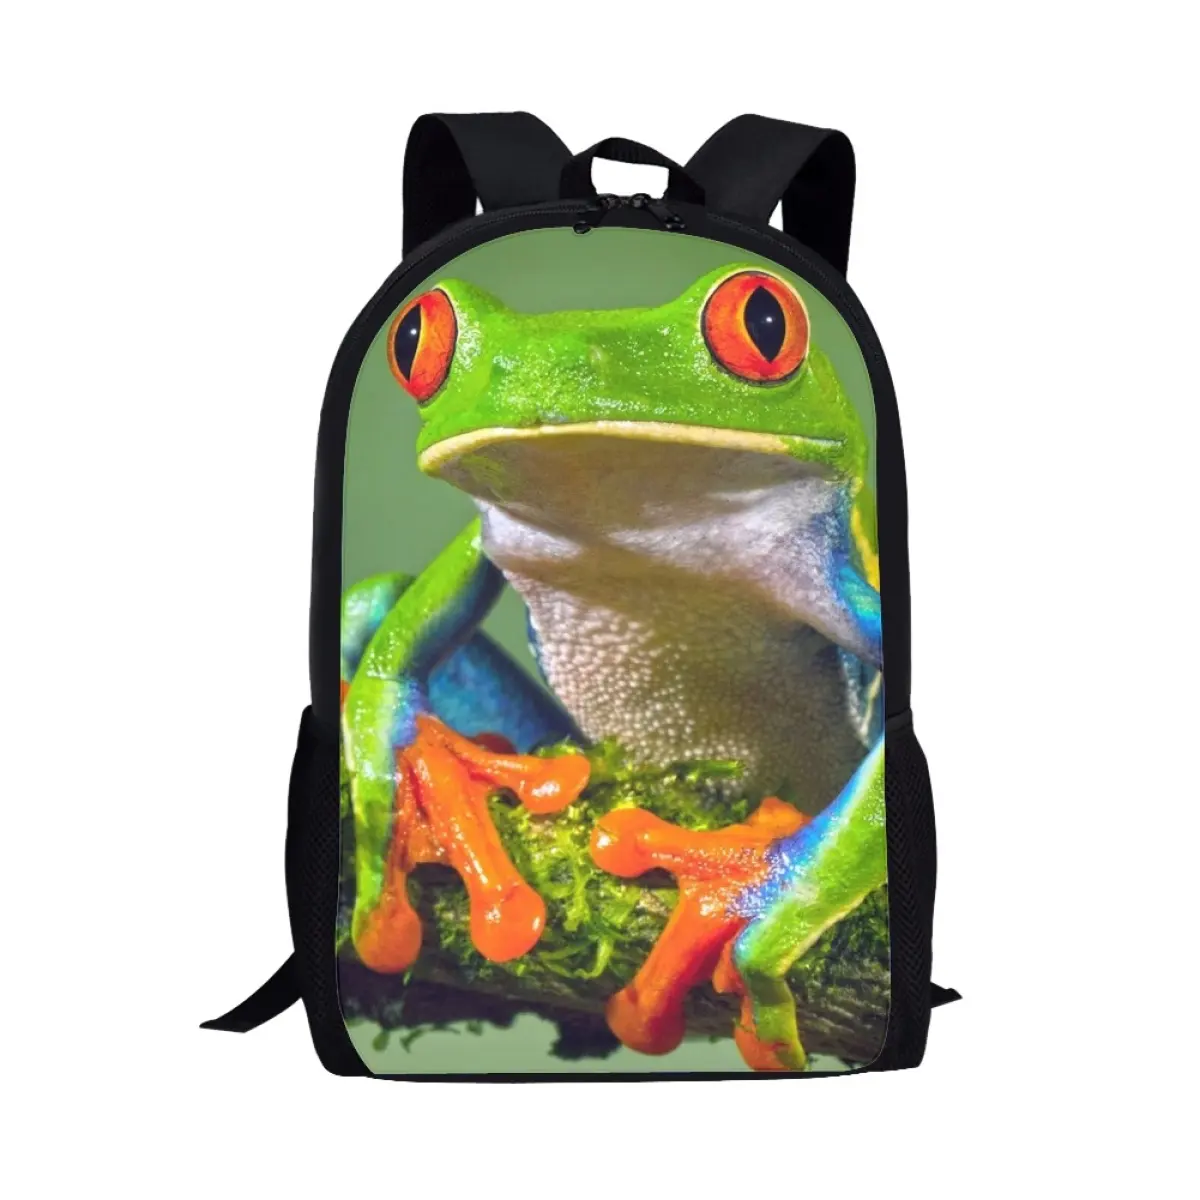 1 Pc Custom Cool 17 inch Animals Red-eyed Tree Frog School Bag Backpack For Kids 5-7 Personalized Bookbag Boys